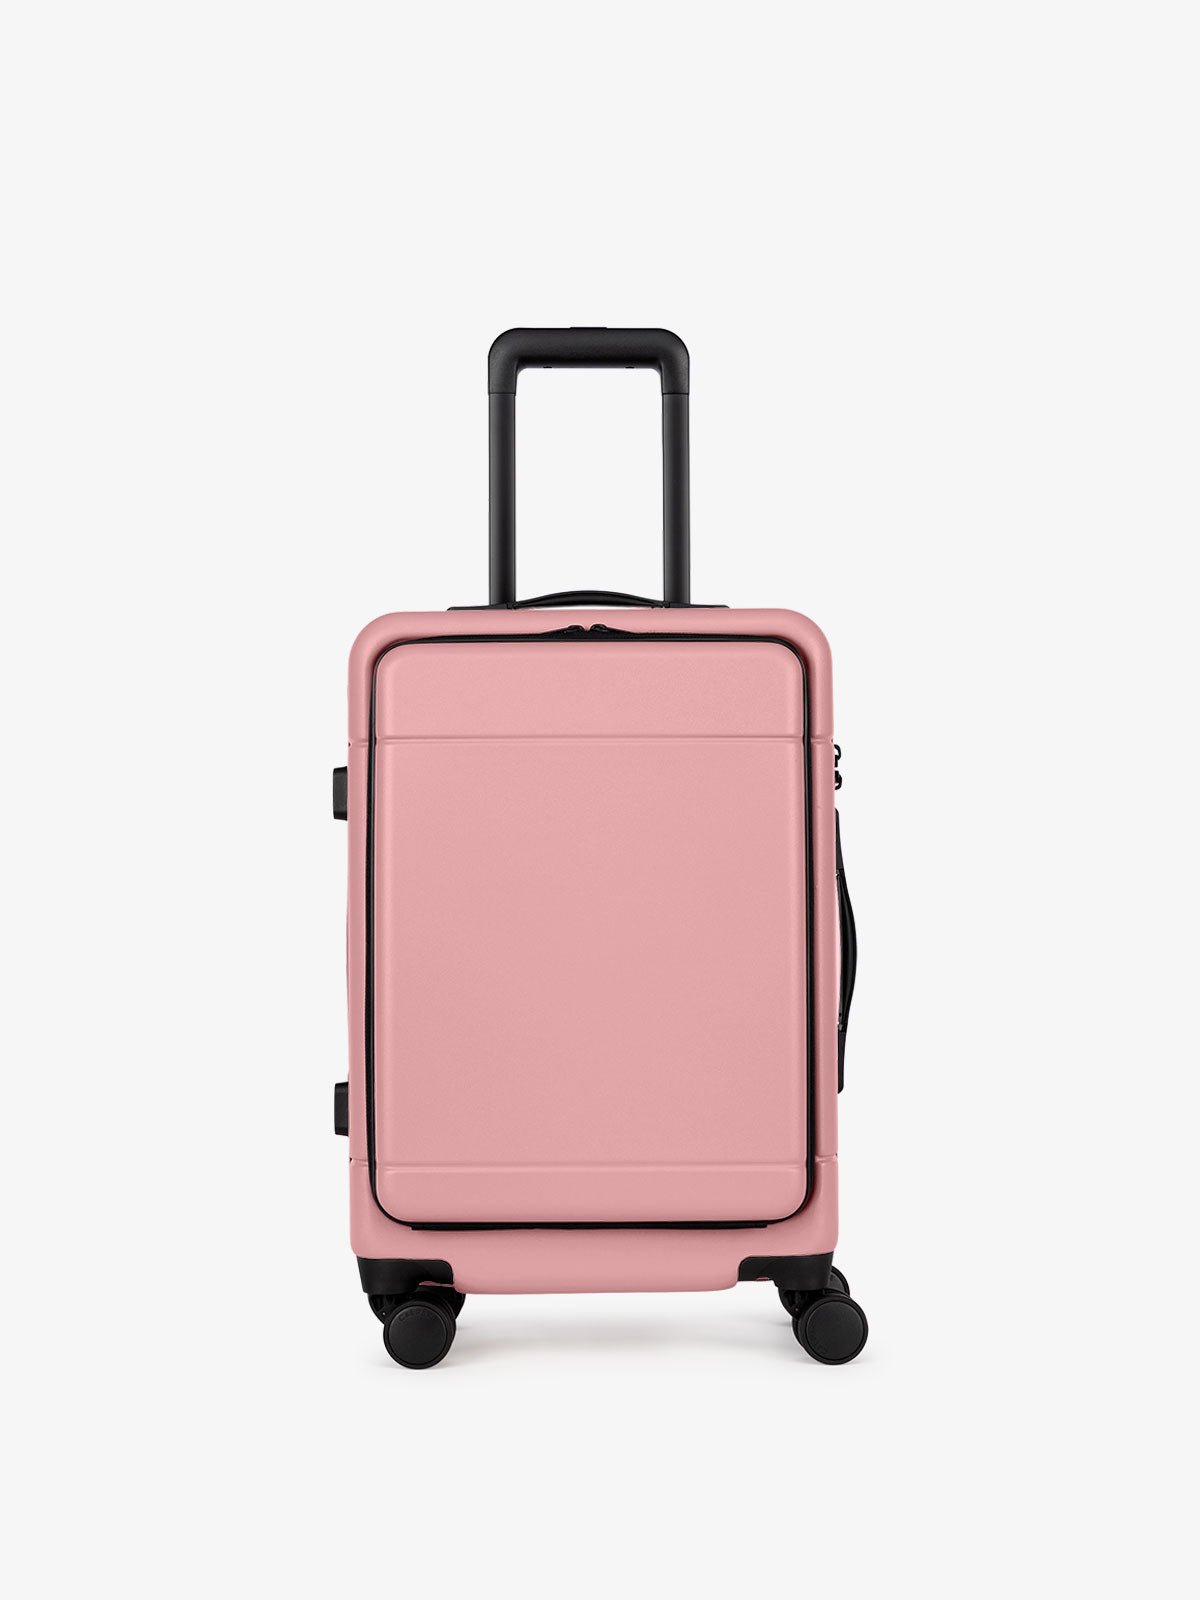 Pink mauve CALPAK Hue Front Pocket Carry-On Luggage with telescopic handle